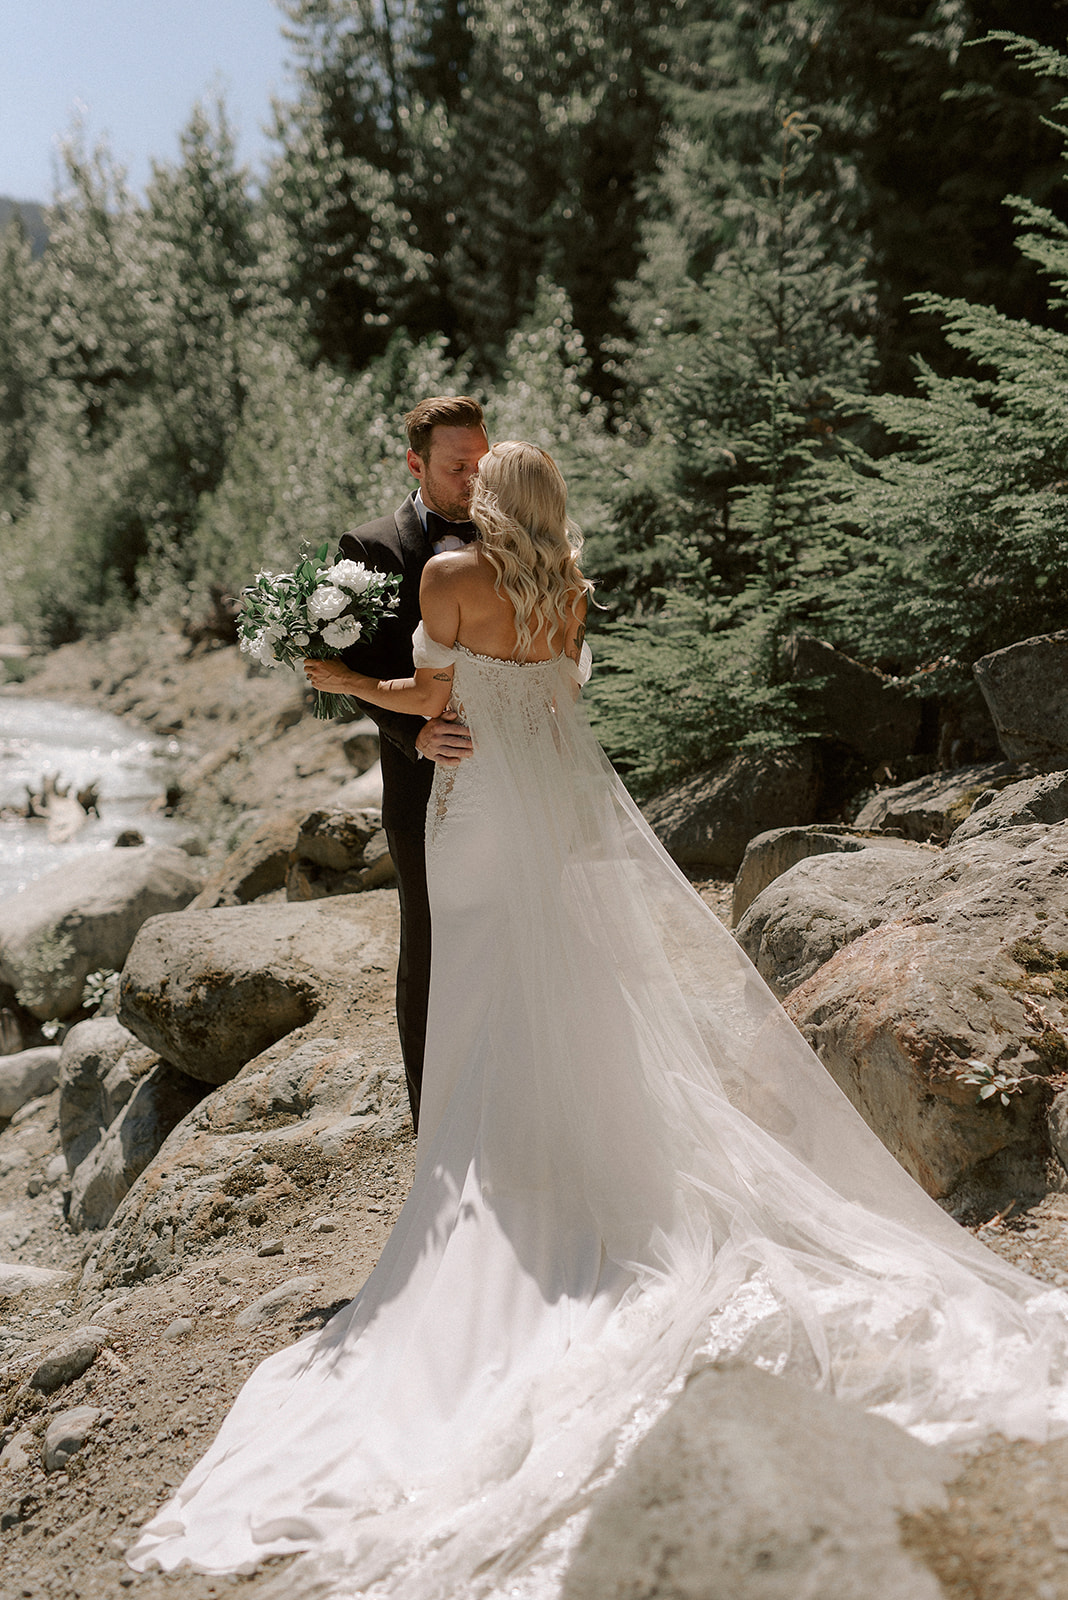 Vancouver wedding photographer captures photos of couple having their first look in Whistler